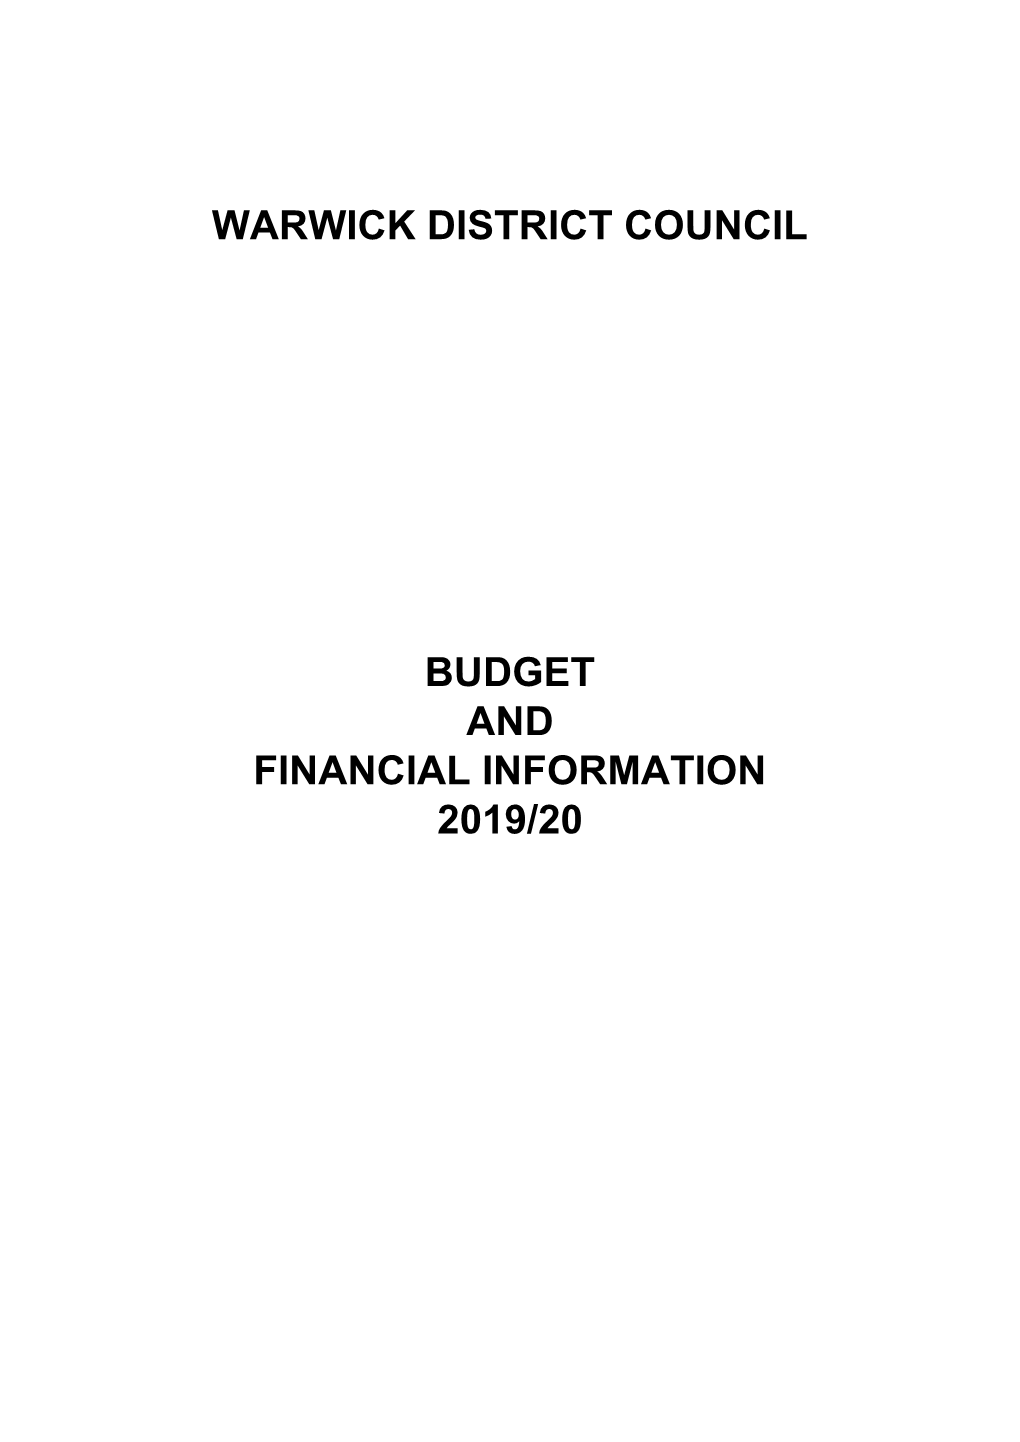 Warwick District Council Budget and Financial Information 2019/20